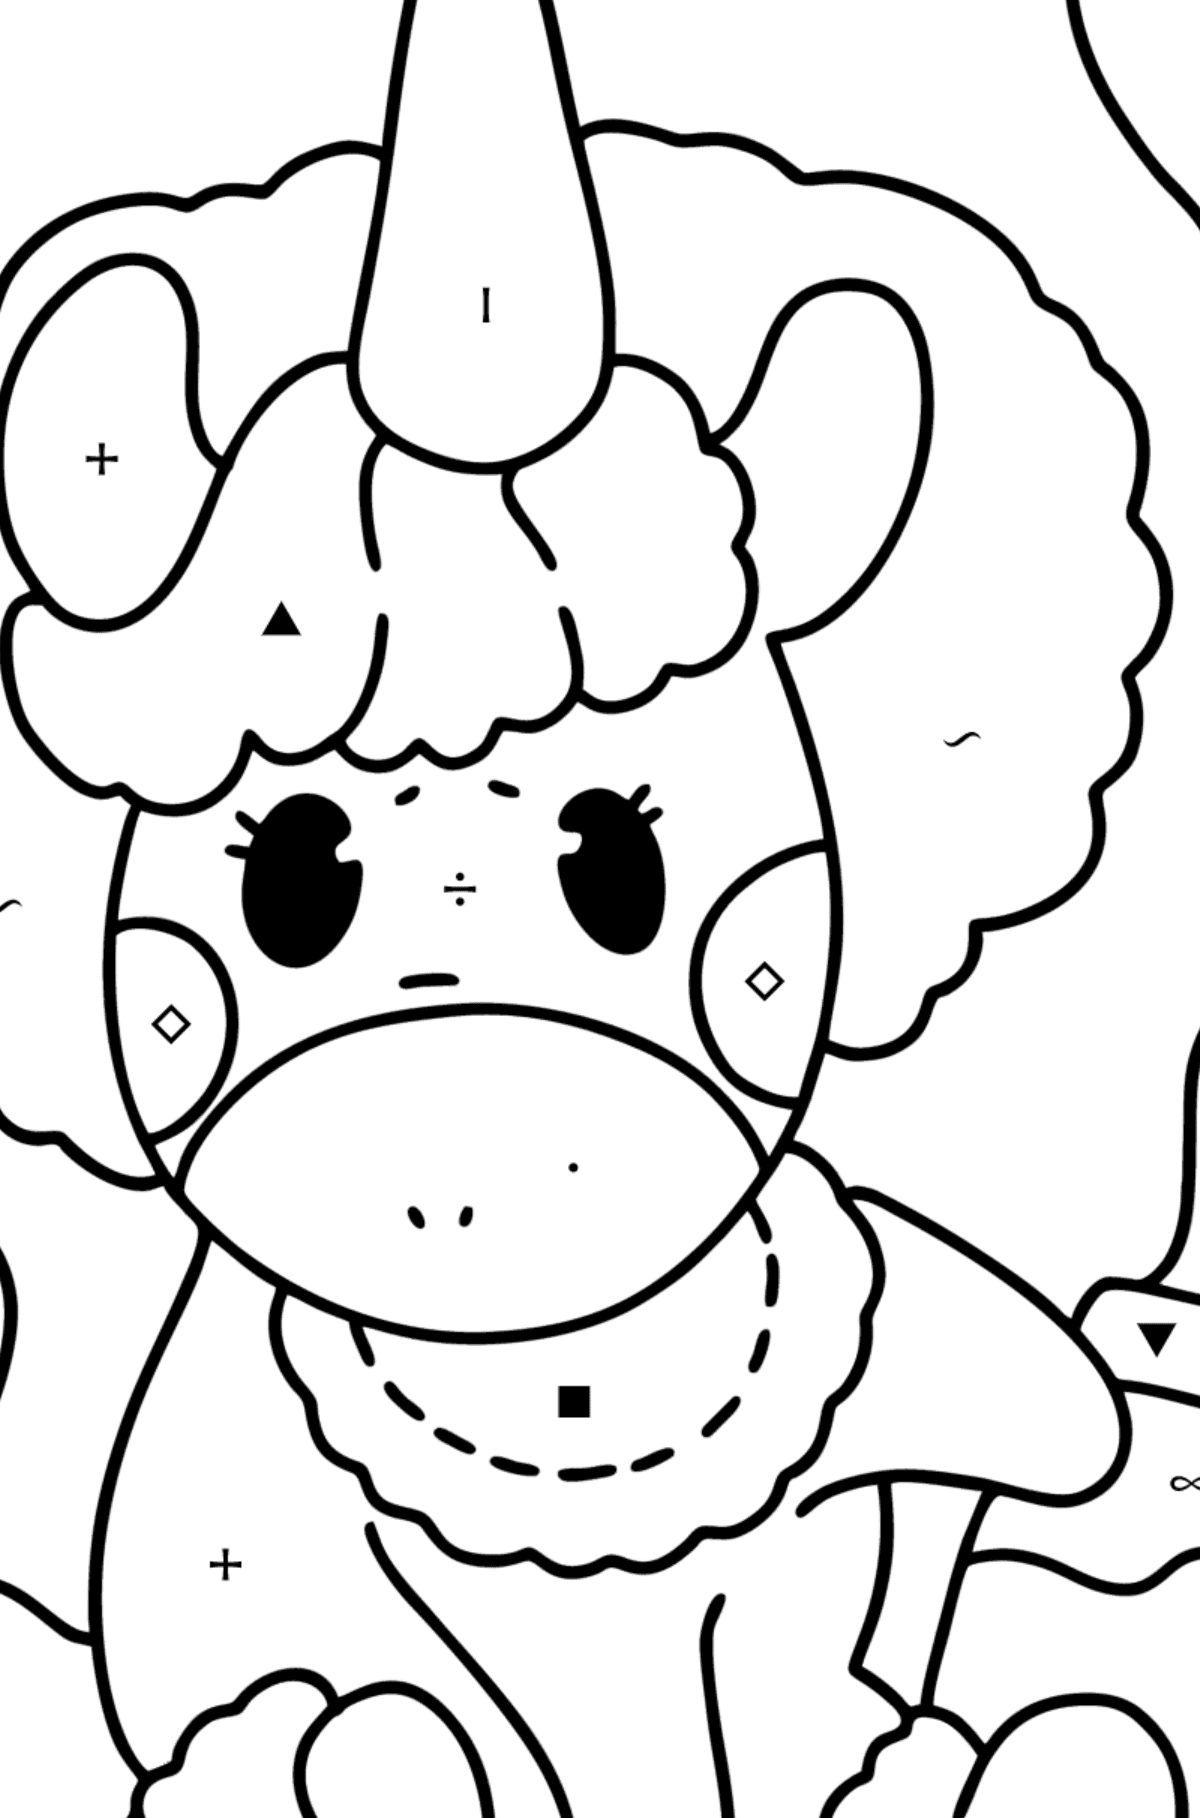 Unicorn kid coloring page - Coloring by Symbols for Kids